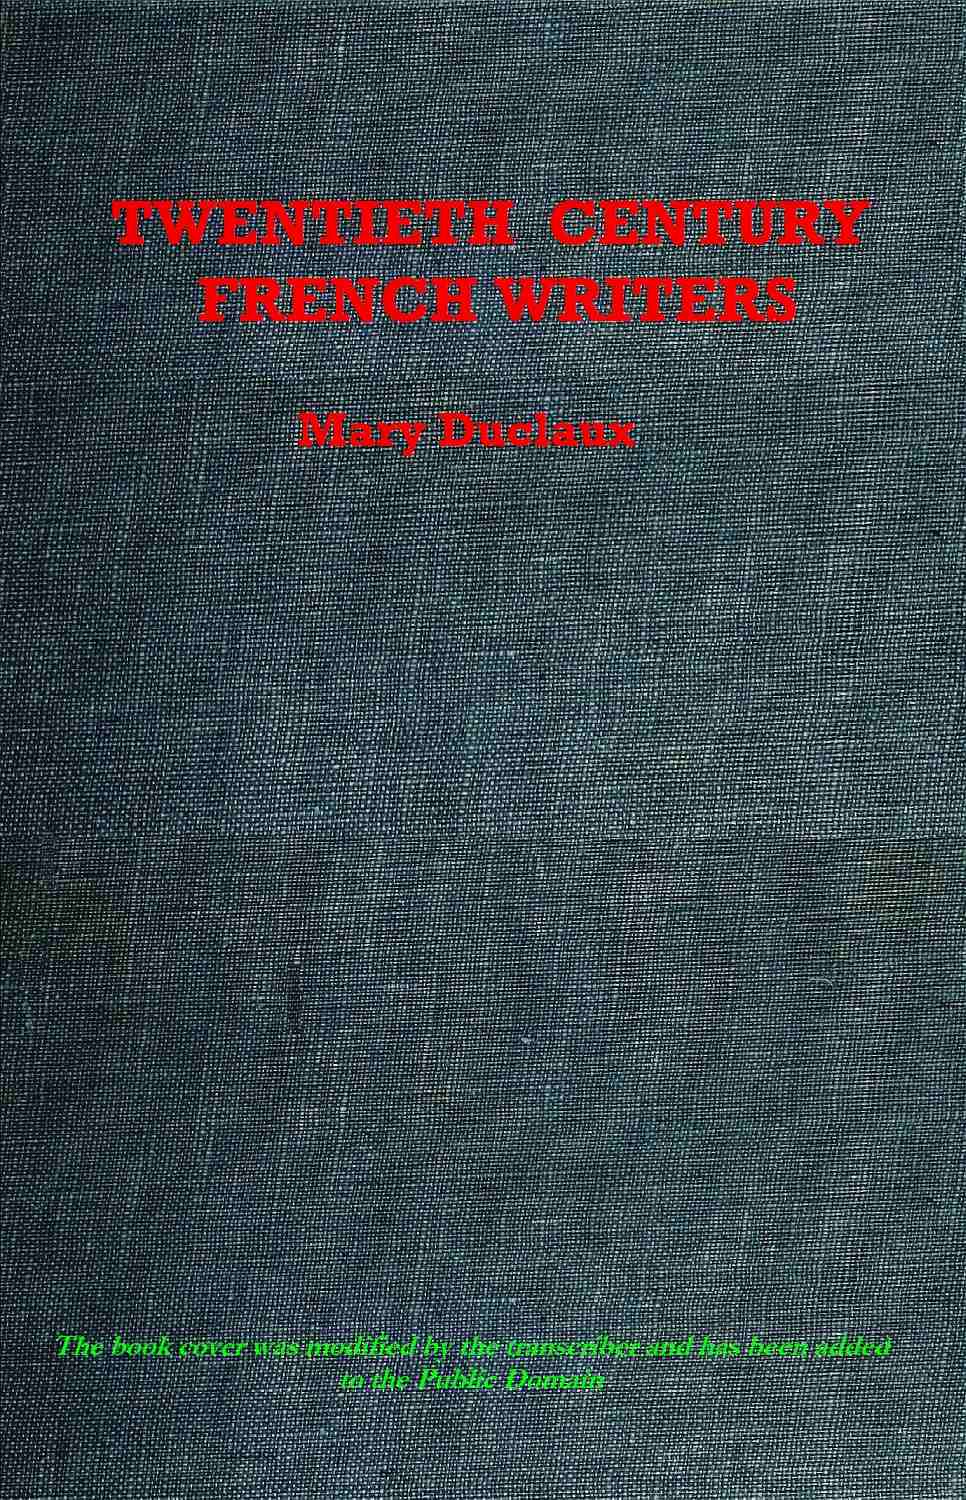 Twentieth Century French Writers, by Mary Duclaux—A Project Gutenberg eBook